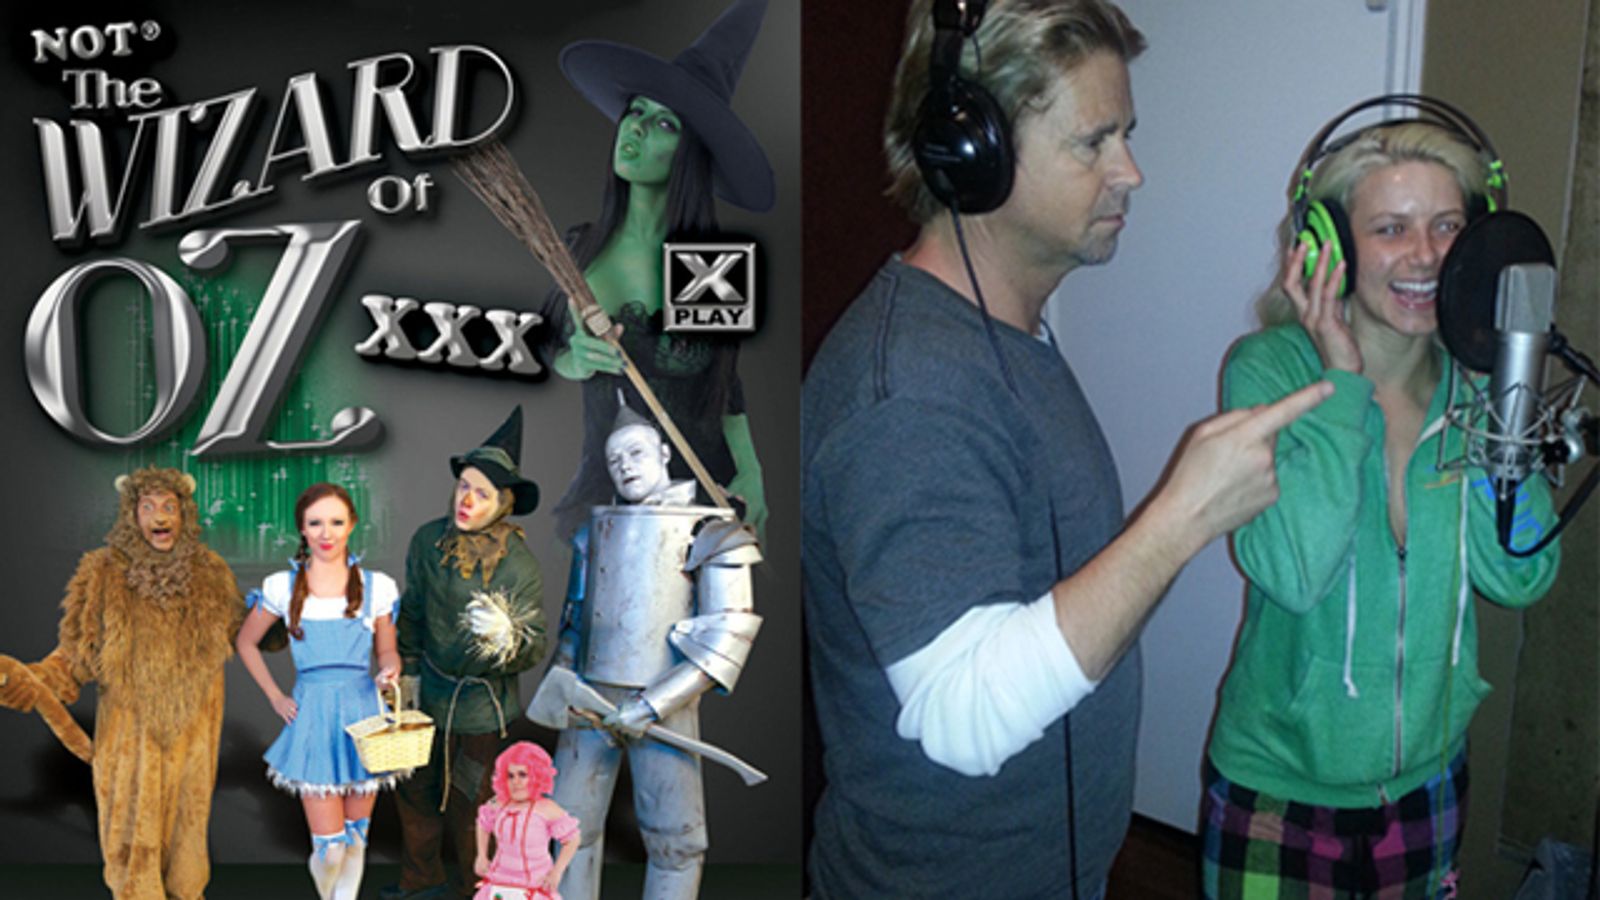 Music Recording Sessions Boost ‘Not the Wizard of Oz XXX’